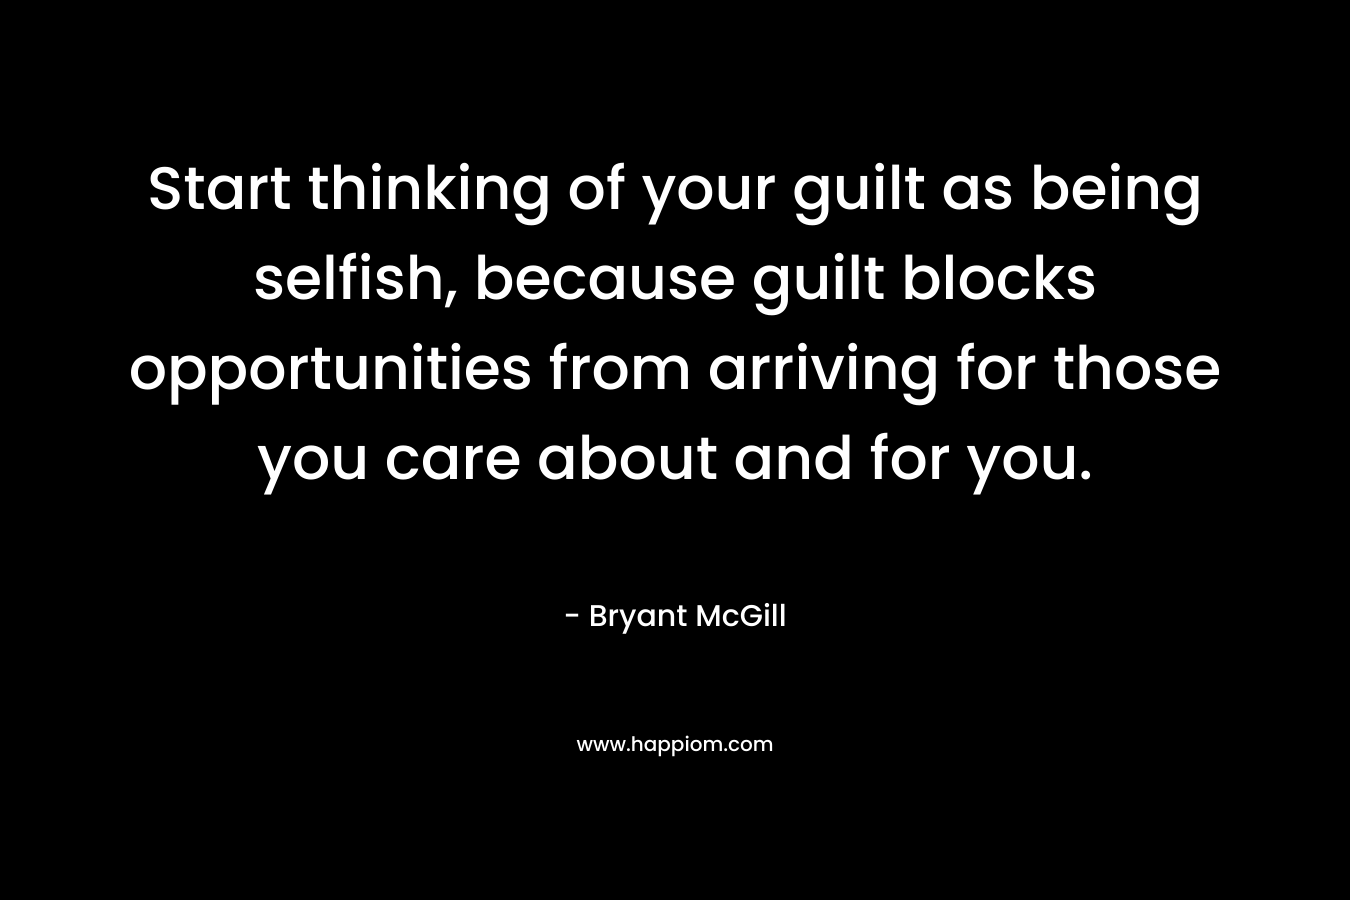 Start thinking of your guilt as being selfish, because guilt blocks opportunities from arriving for those you care about and for you. – Bryant McGill